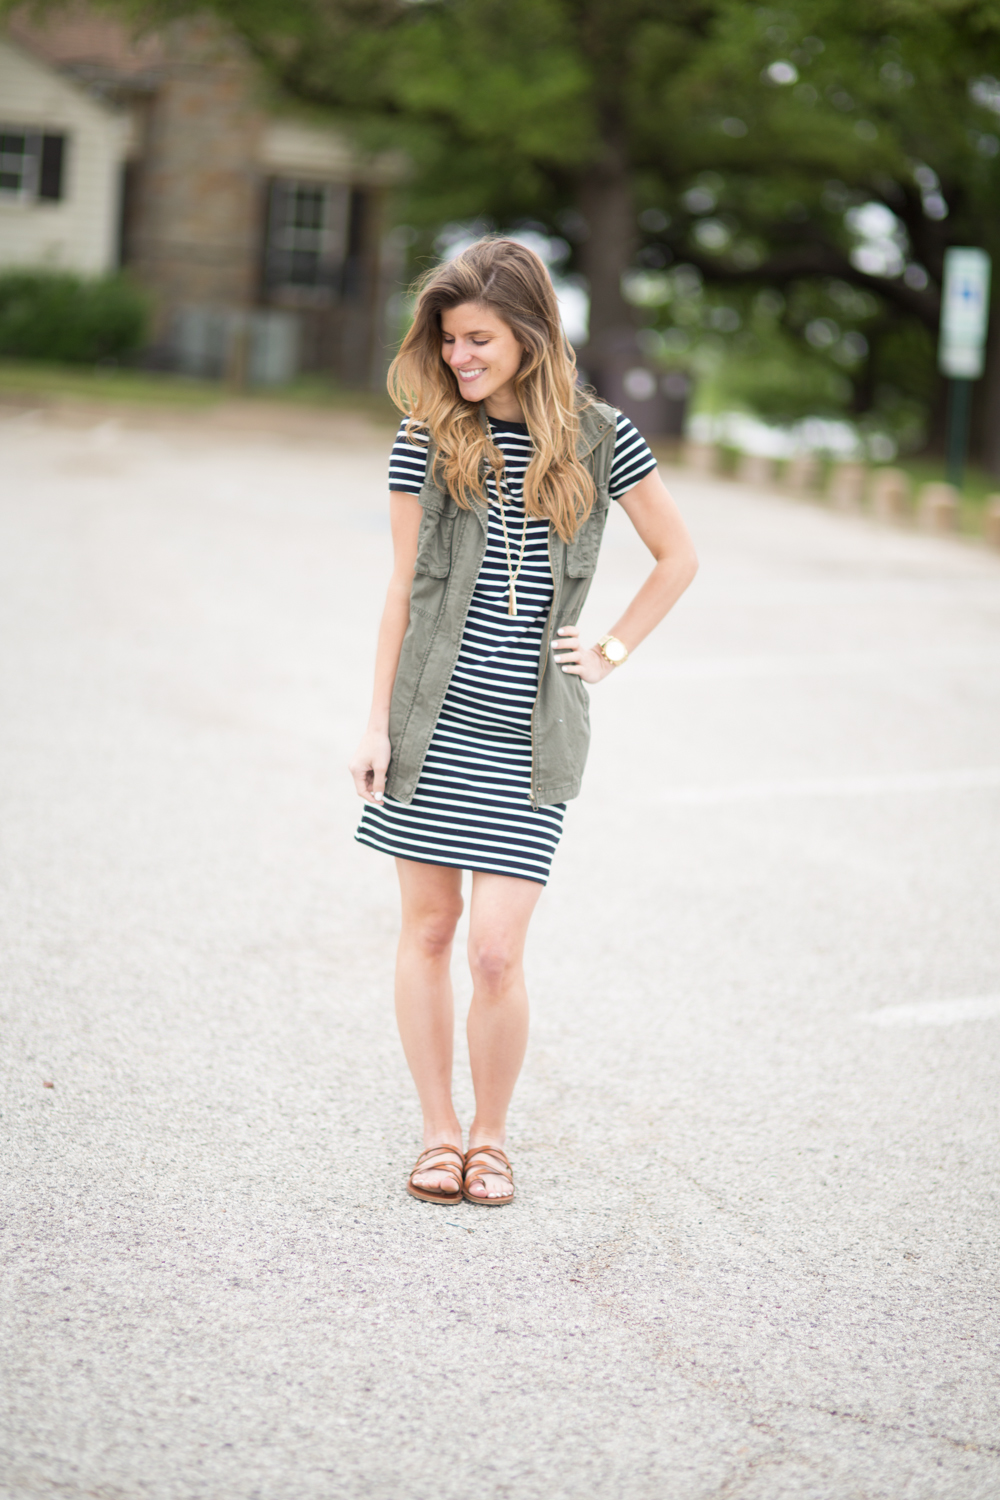 striped dress, utility vest, strappy brown leather sandals, casual everyday outfit, transitional style, outfit with utility vest, stripes and military vest, outfit with flats, casual outfit idea, how to wear a utility vest, gold pendant necklace